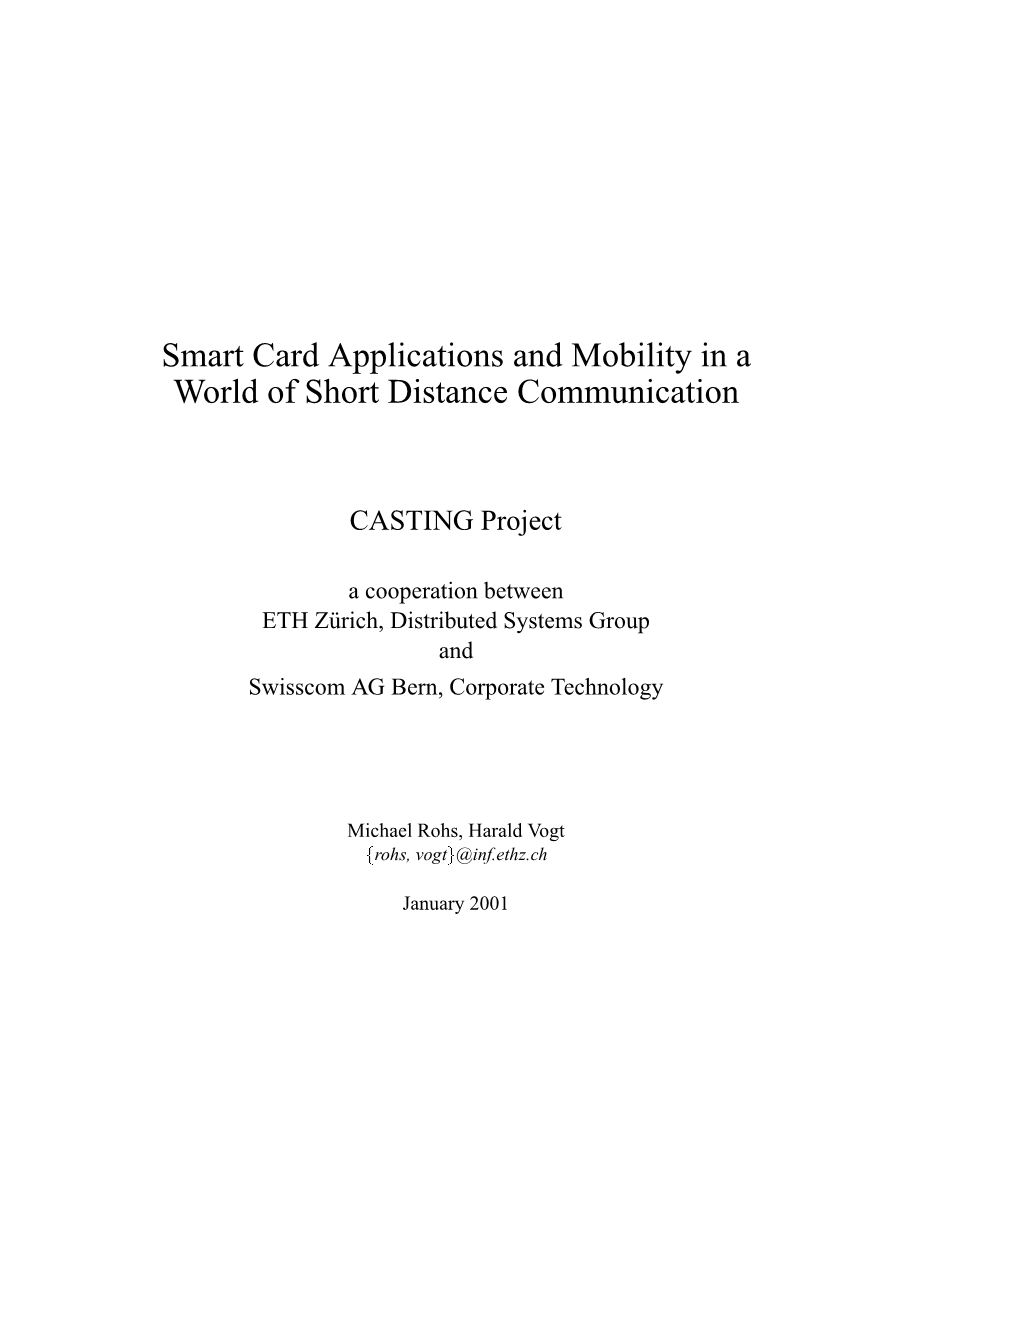 Smart Card Applications and Mobility in a World of Short Distance Communication